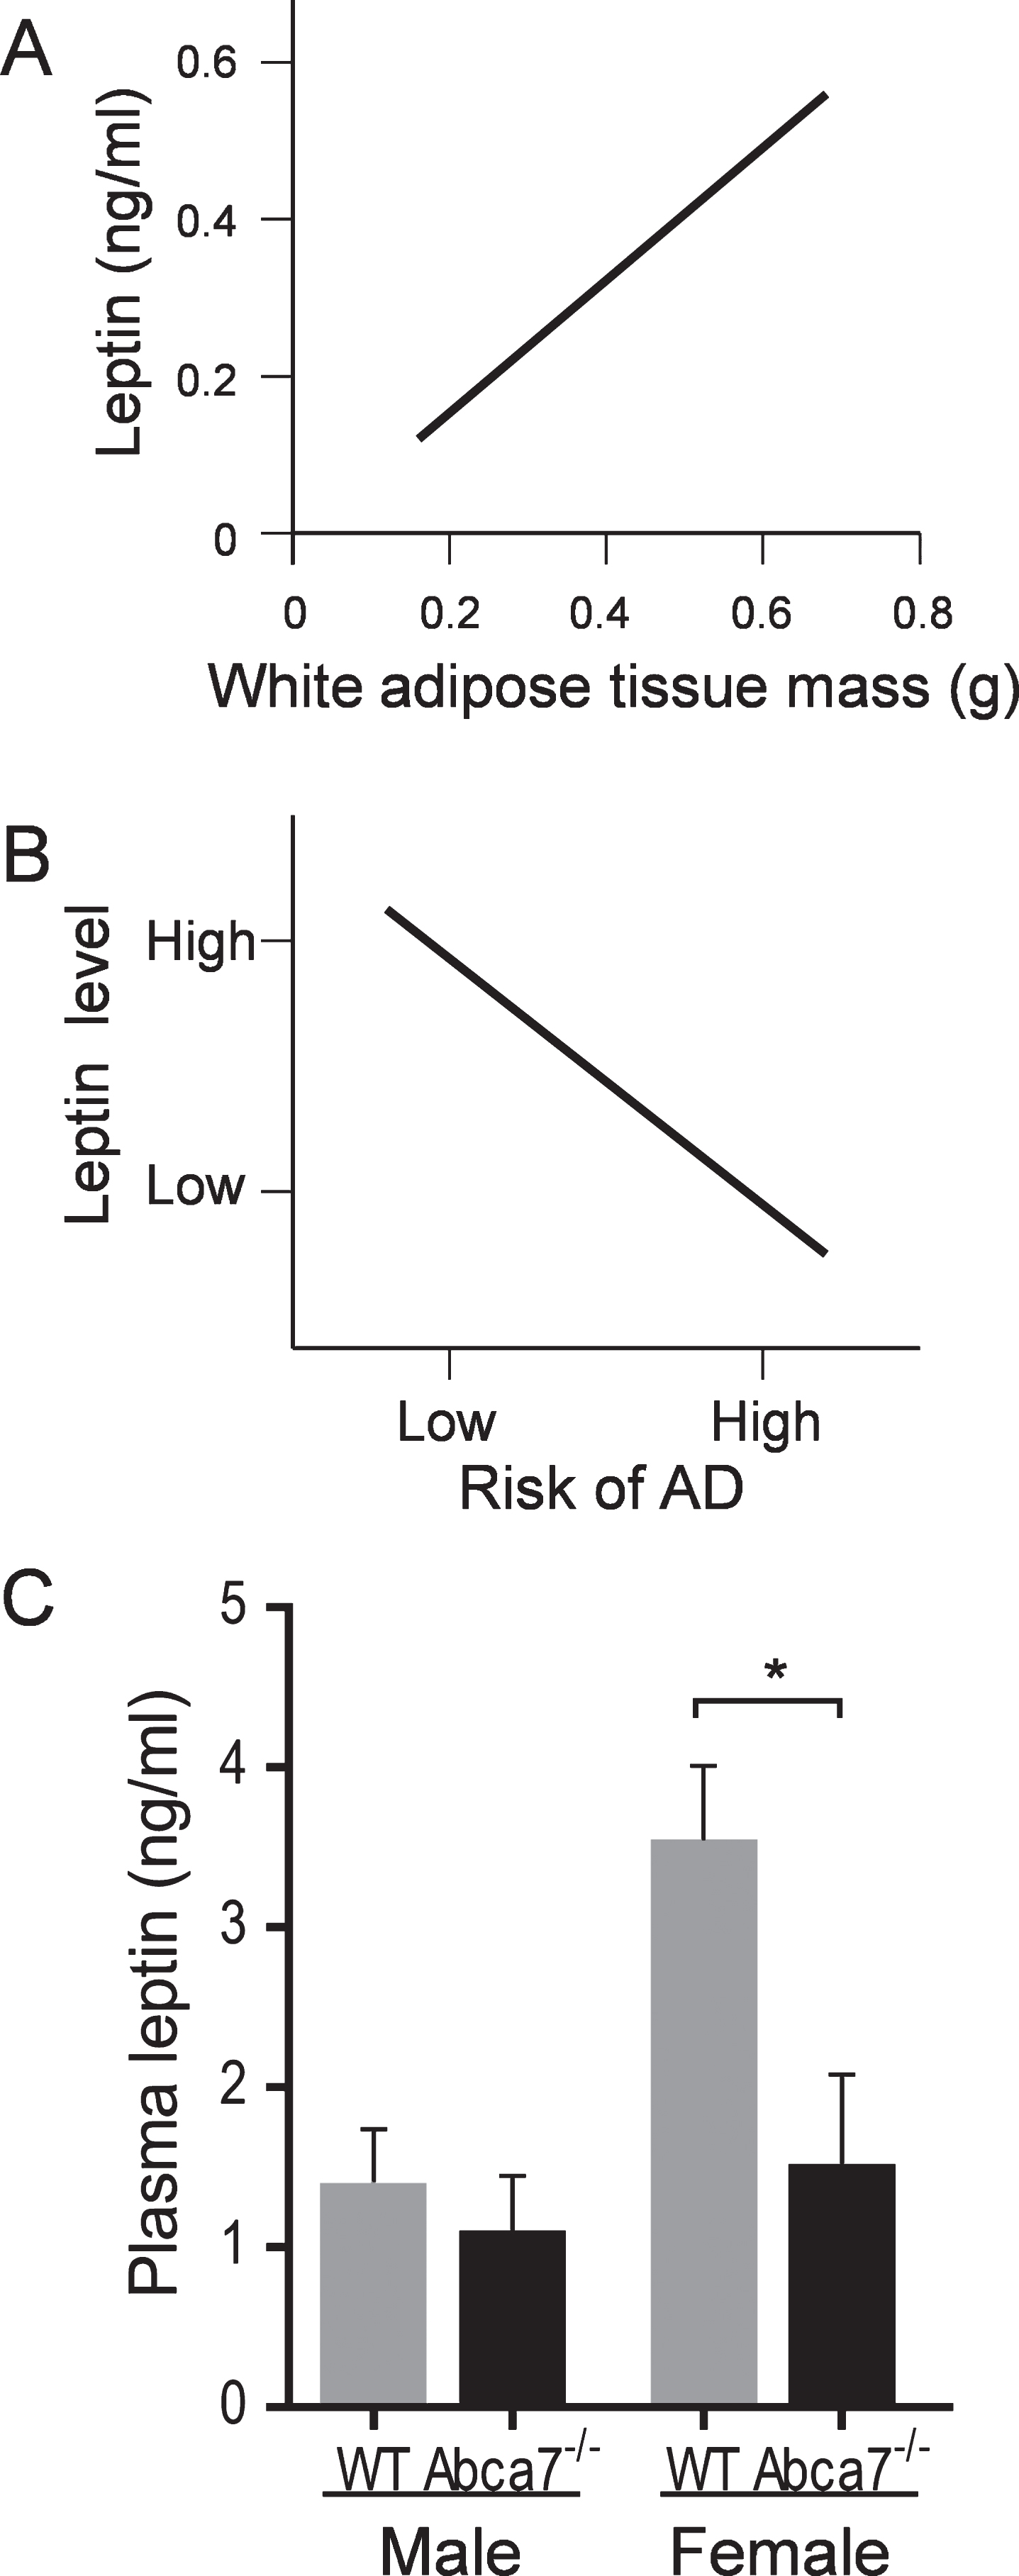 Deletion of ABCA7 reduces the circulating leptin level in female Abca7–/– mice. A) A theoretical plot depicts the linear relationship between circulating leptin level and WAT mass. B) A theoretical plot depicts the inverse relationship between circulating leptin level and AD risk, i.e., the higher the leptin level the lower the AD risk. C) Plasma leptin levels were significantly reduced in female Abca7–/– mice as measured by ELISA. Data represent mean (n = 6) and SE as error bars,  *p < 0.05.